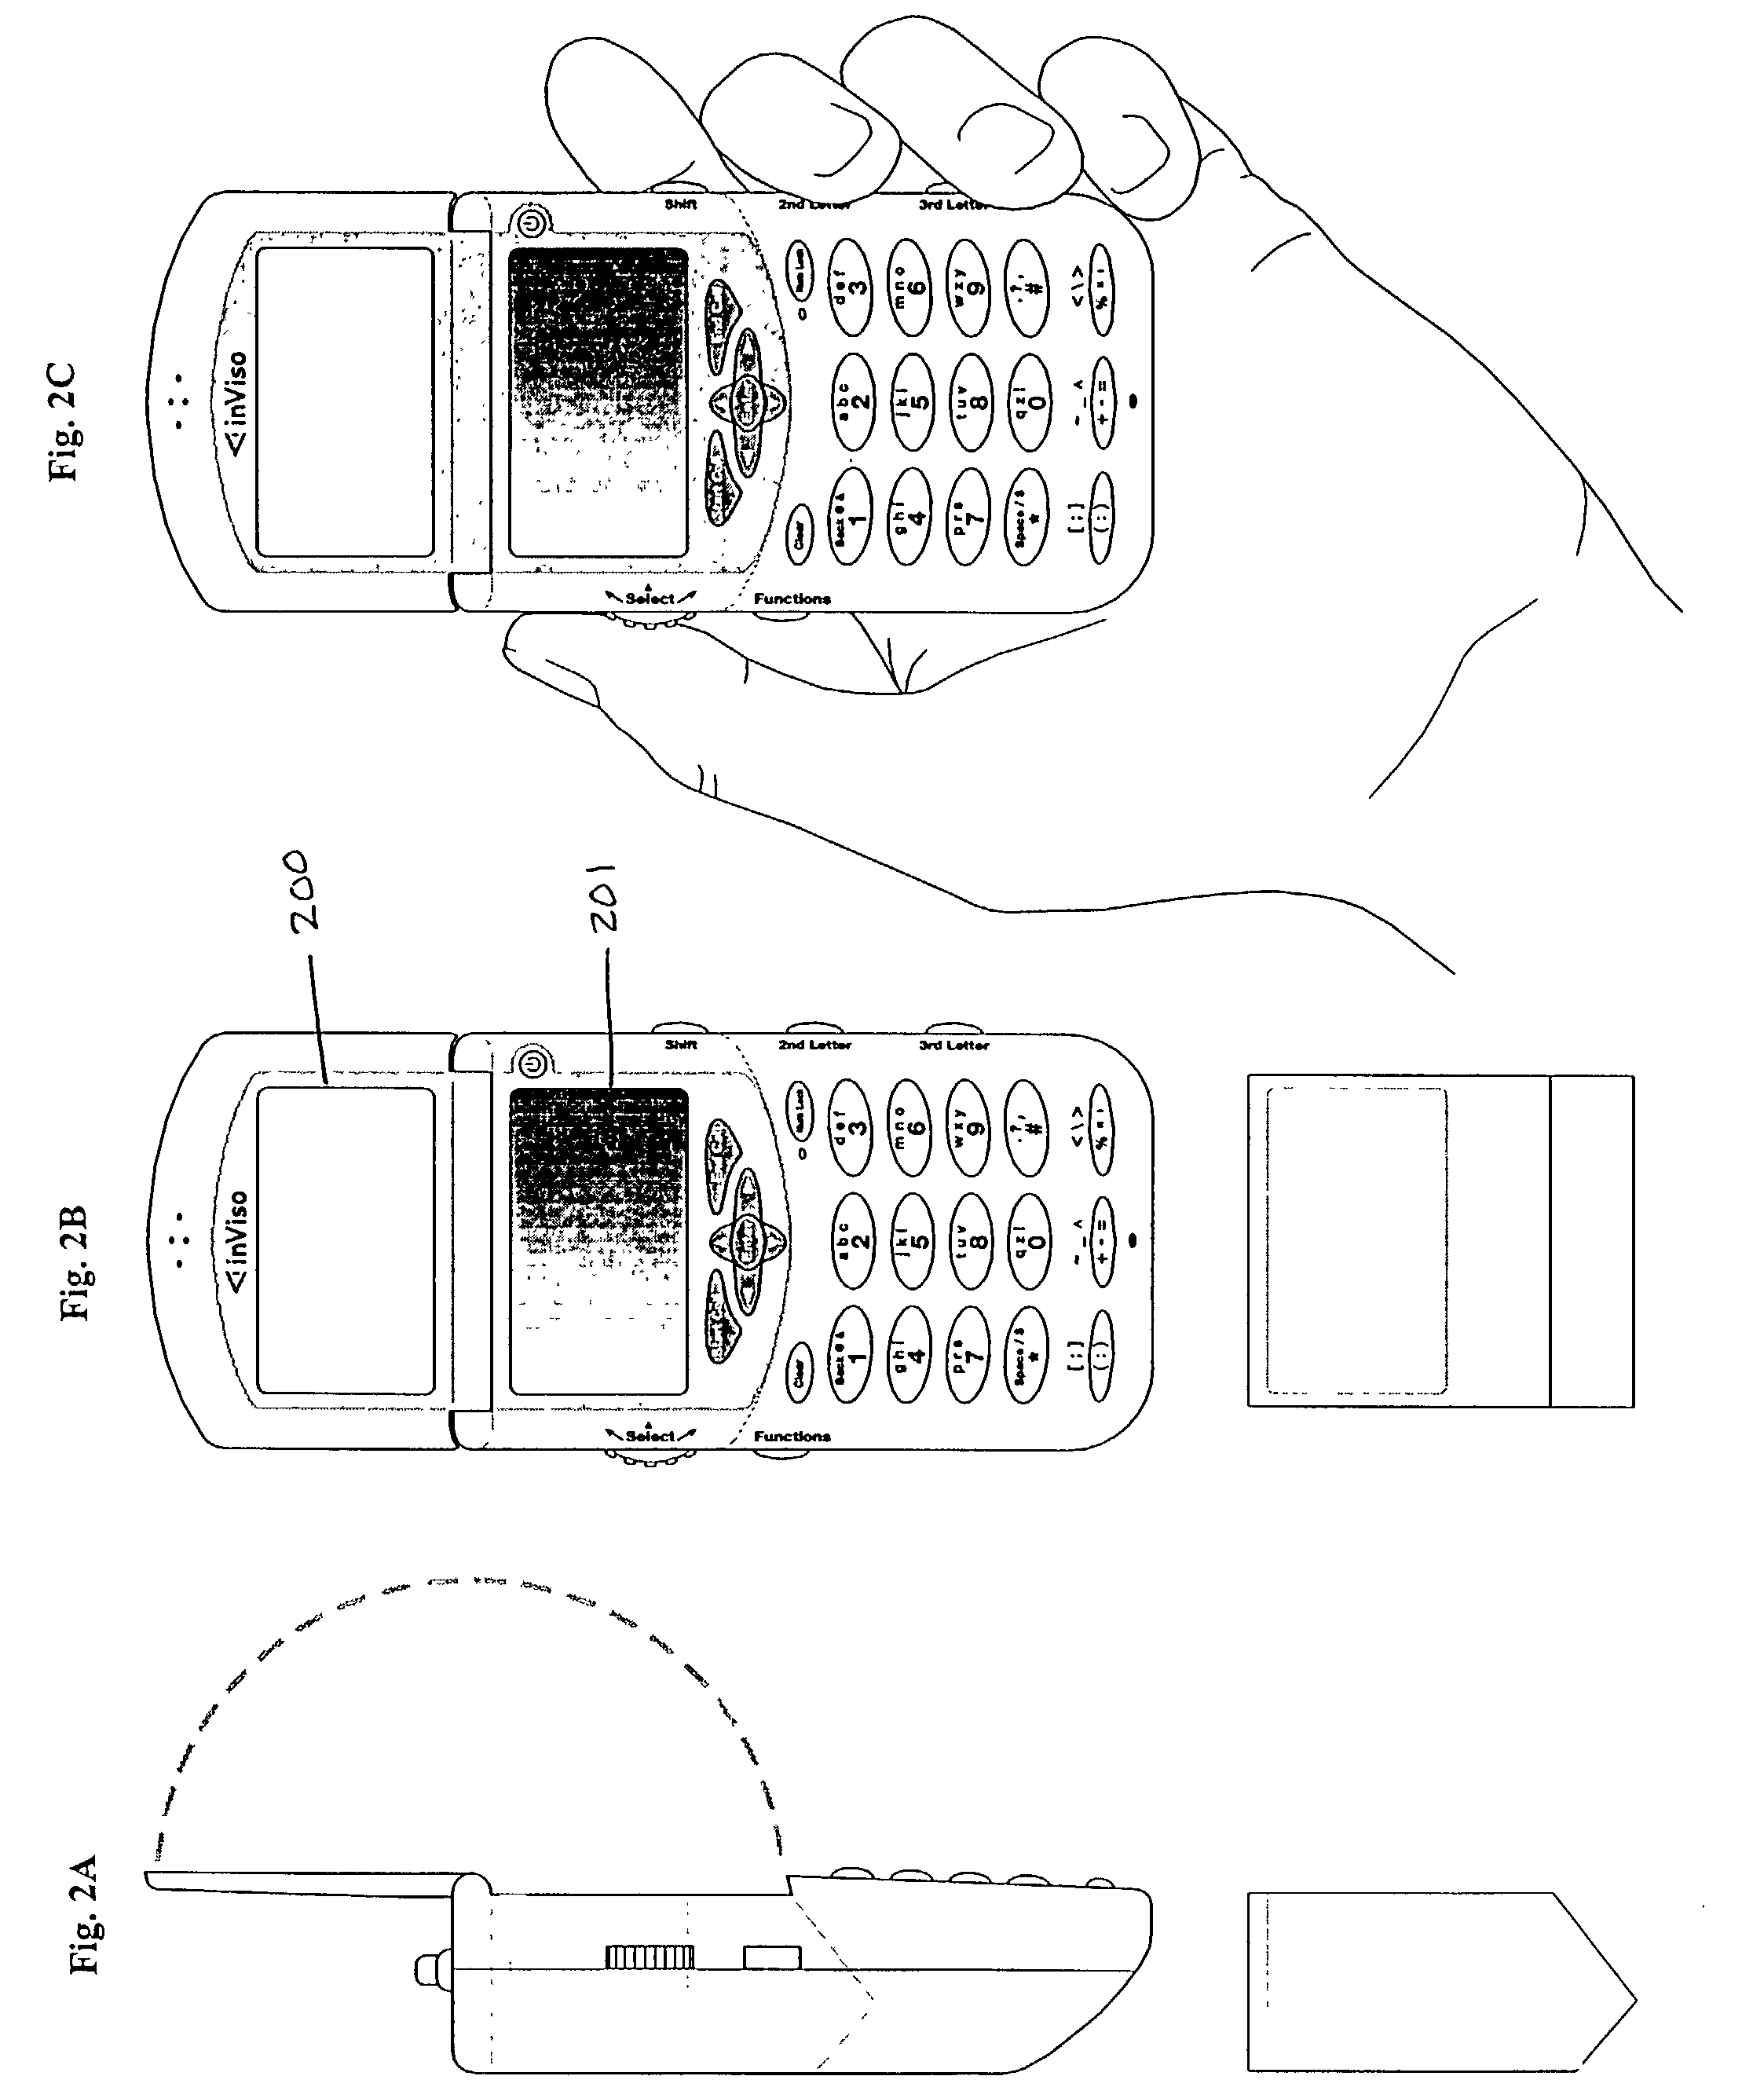 Coordinating images displayed on devices with two or more displays